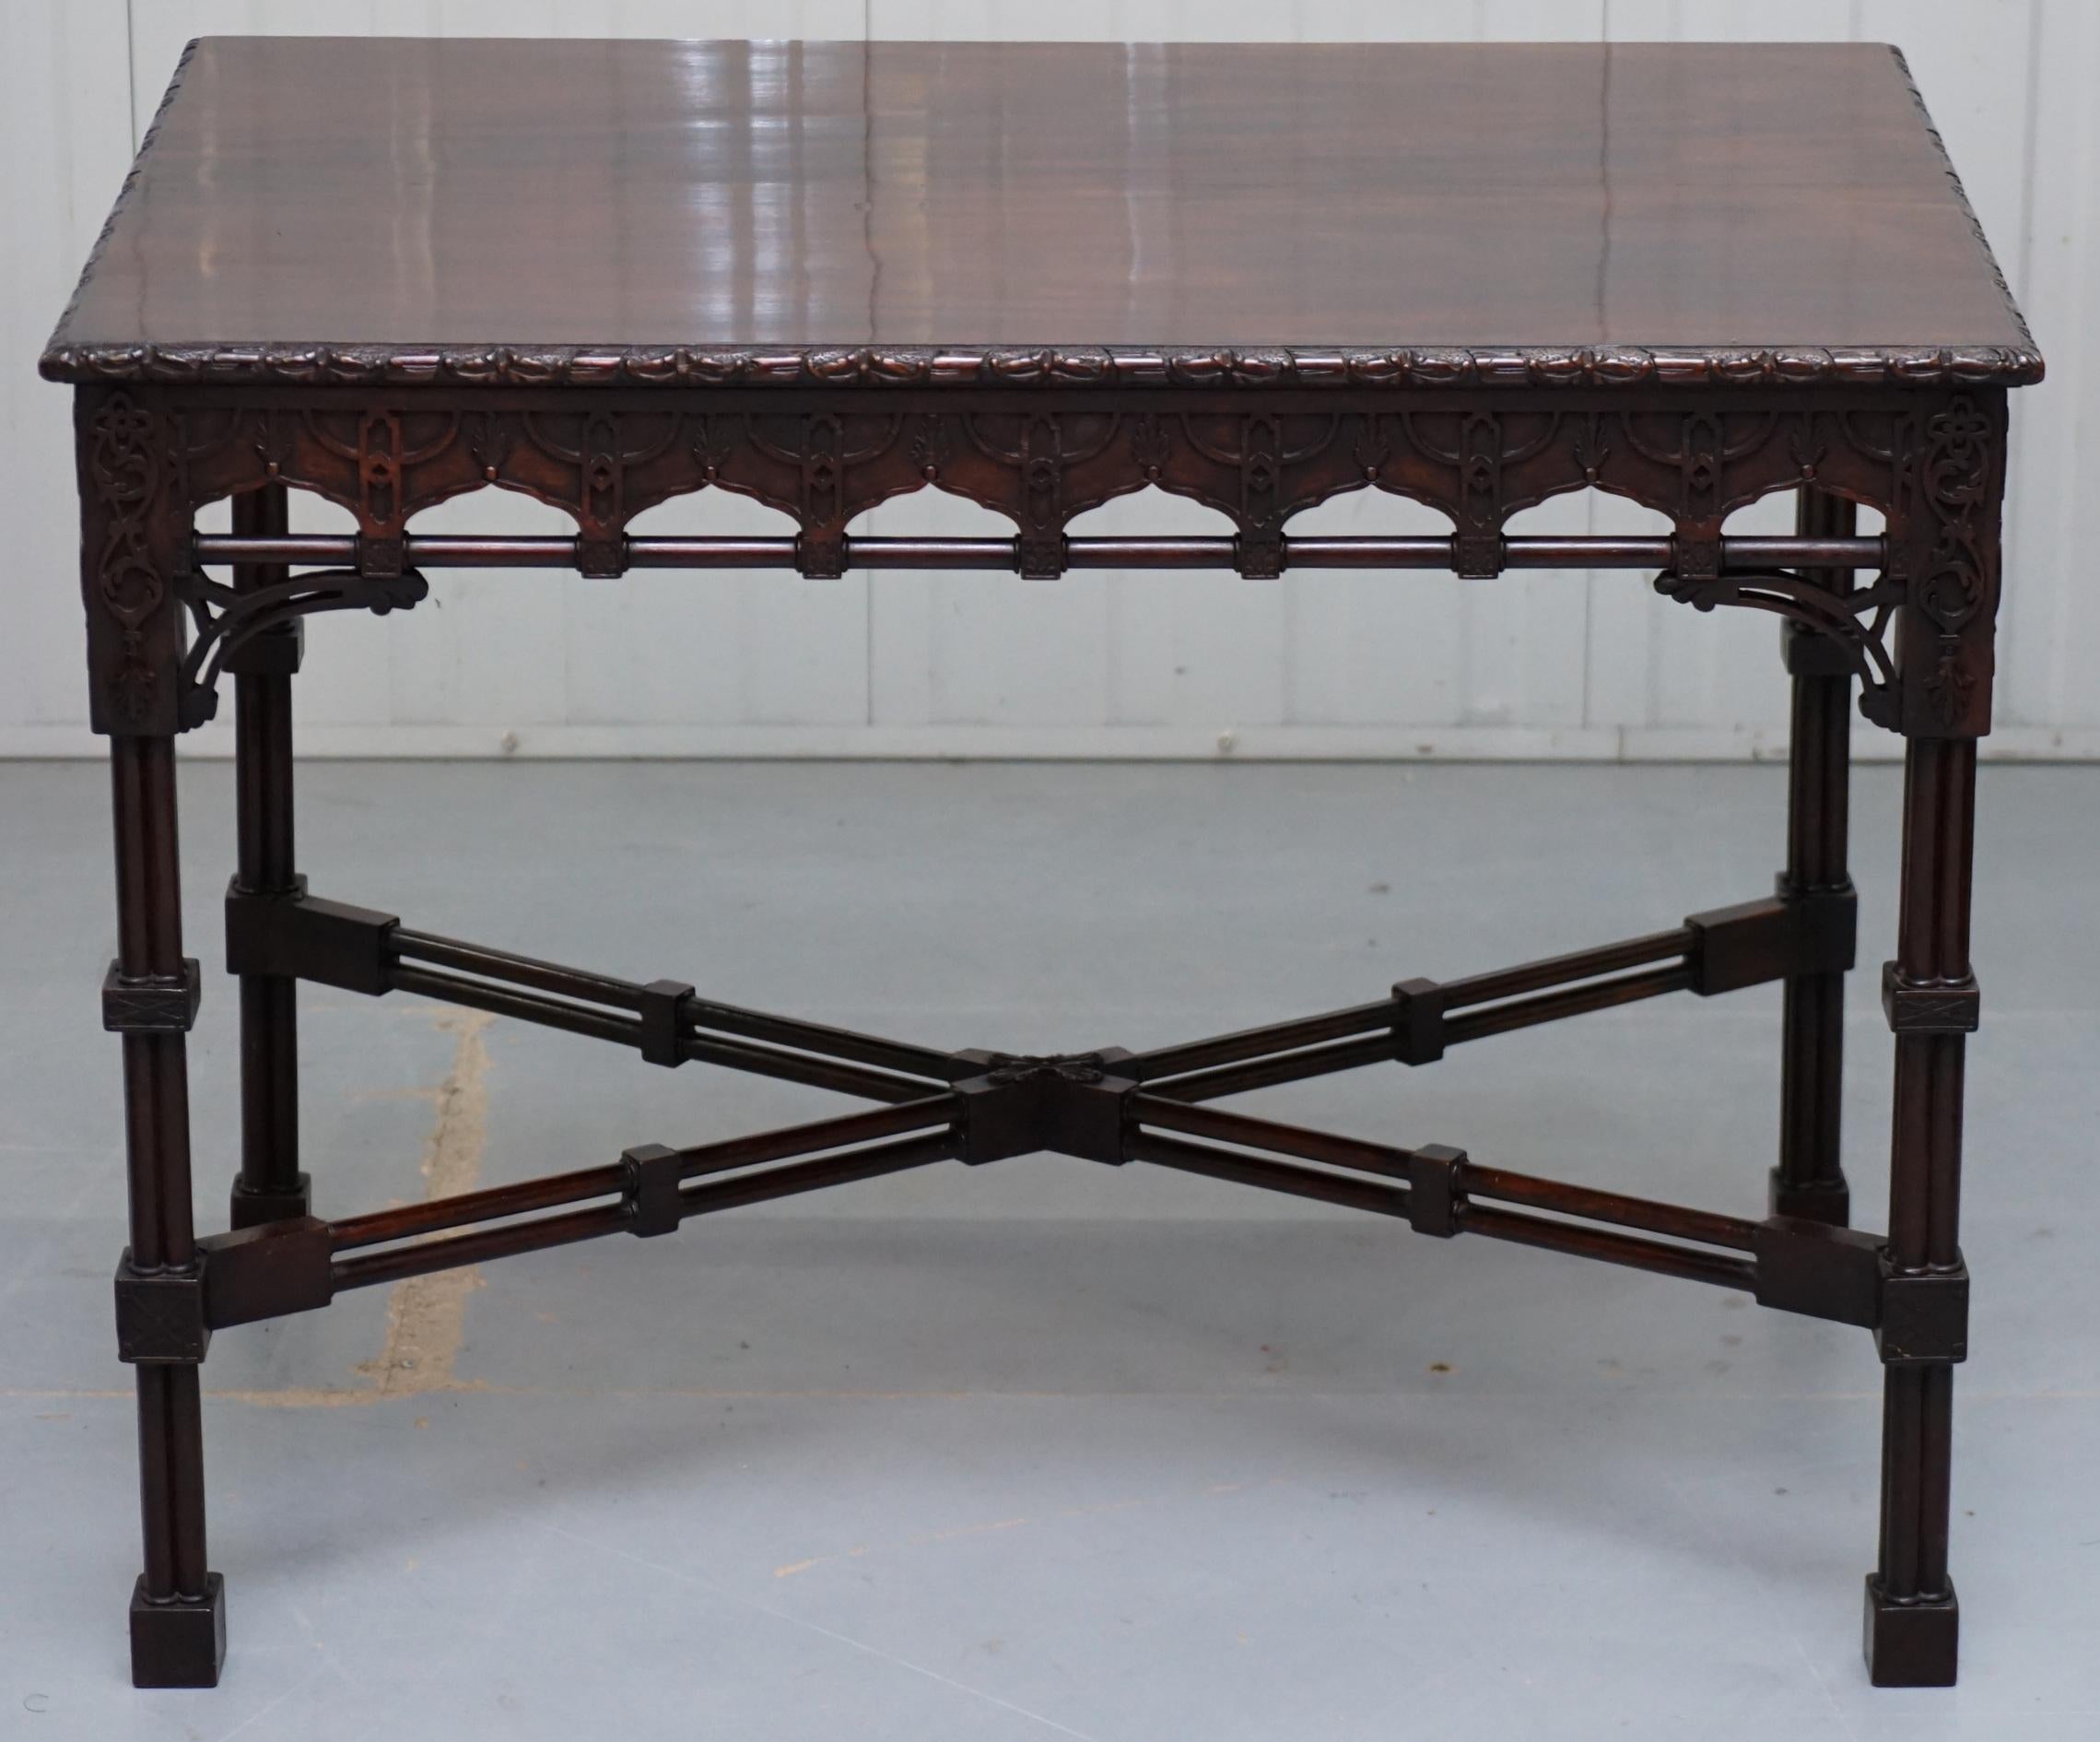 We are delighted to offer for sale this very rare Thomas Chippendale style Clustered Column leg occasional silver tea table in Mahogany

This table is stunning, I would say early 19th, the timber patina is exquisite as is the carving, the table